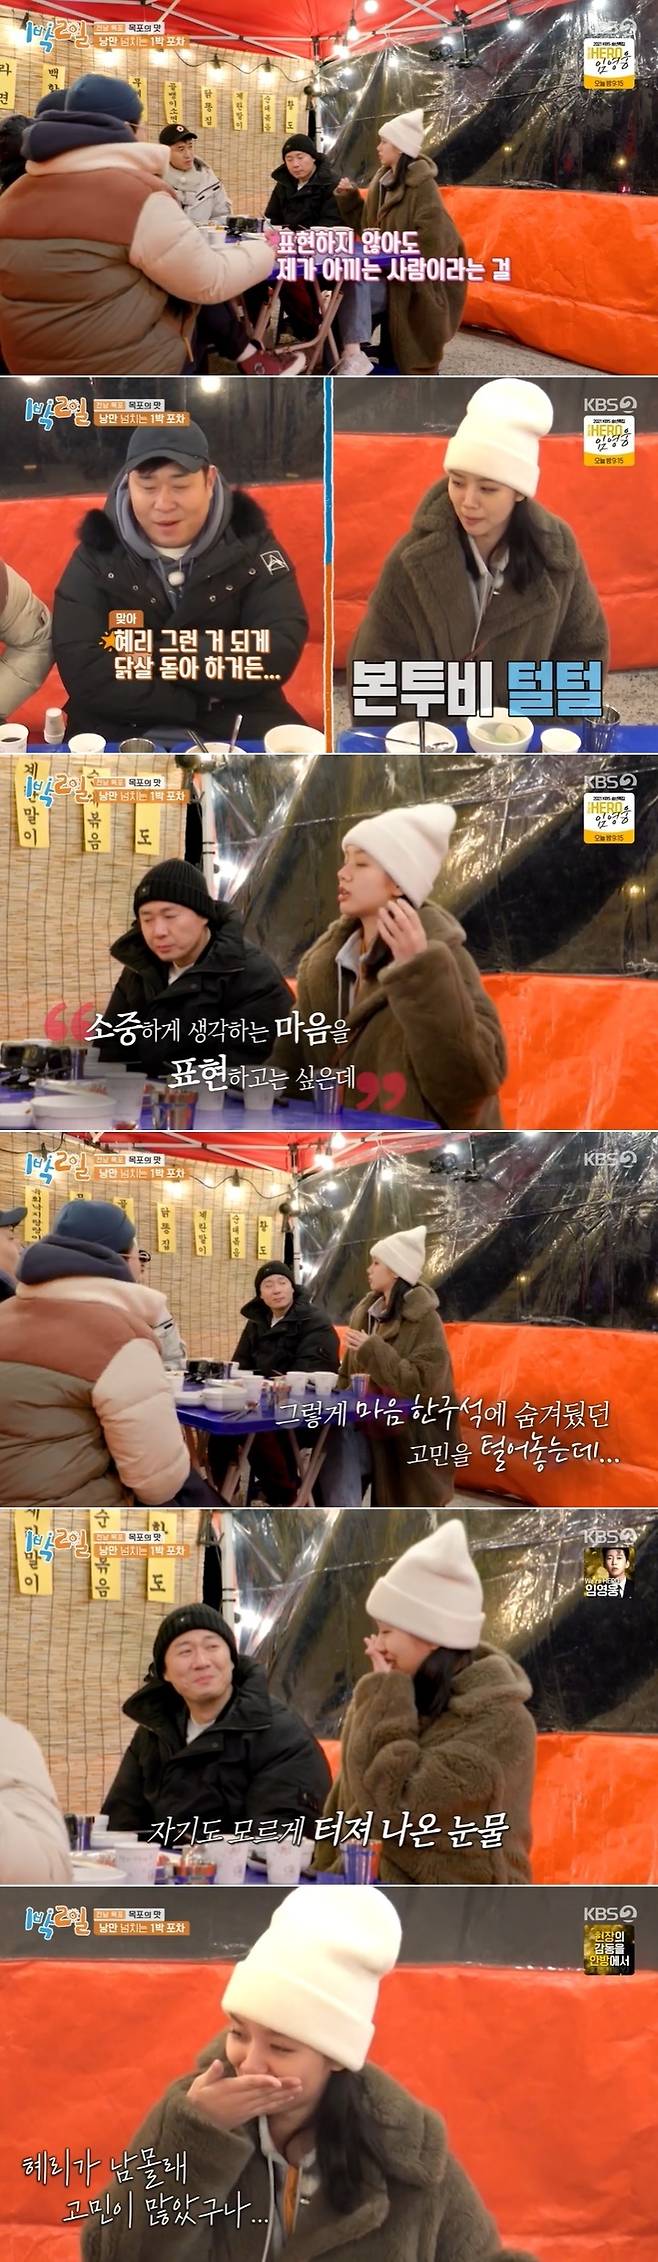 Hyeri showed tears to the members of 2 Days & 1 Night.KBS 2TV 2 Days & 1 Night Season 4 broadcast on December 26 featured five members of 2 Days & 1 Night and guest hyeri enjoying taste travel in Mokpo, South Jeolla Province.On this day, the members and Hyeri shared a genuine story in the stall.Asked if Hyeri wants to do anything, Hyeri said, I have more trouble than I want to do.Hyeri said, Everyone of my favorite people and friends is good, but it is difficult to shrimp Chinese white. I do not have a heart, but Chinese white shrimp is not a personality.I thought he would know if he did not, but he did not know it well. Moon Se-yoon, who is close to Hyeri, said, Hyeri is like that. Hyeri said, It is right. I am different from myself.